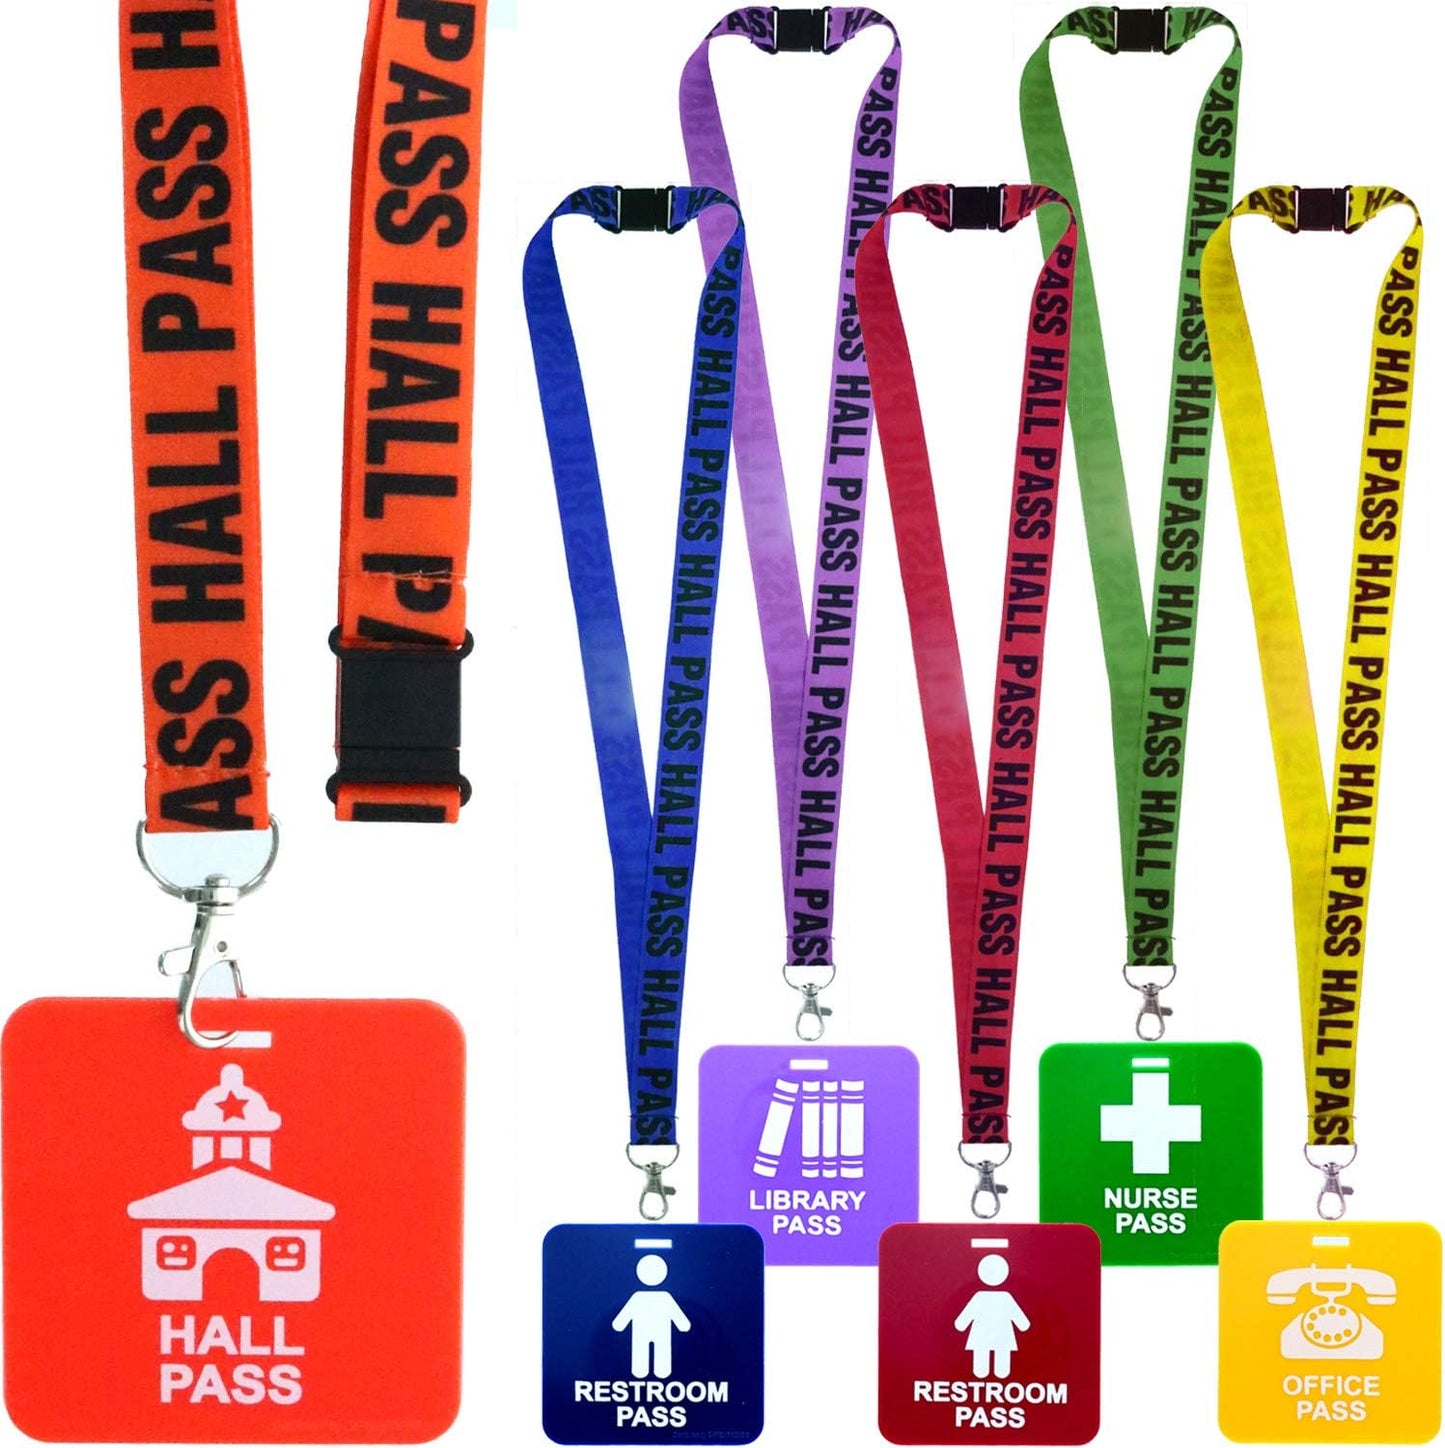 GIFTEXPRESS Hall Pass Lanyards y School Passes, 6" x 7" x 1" 